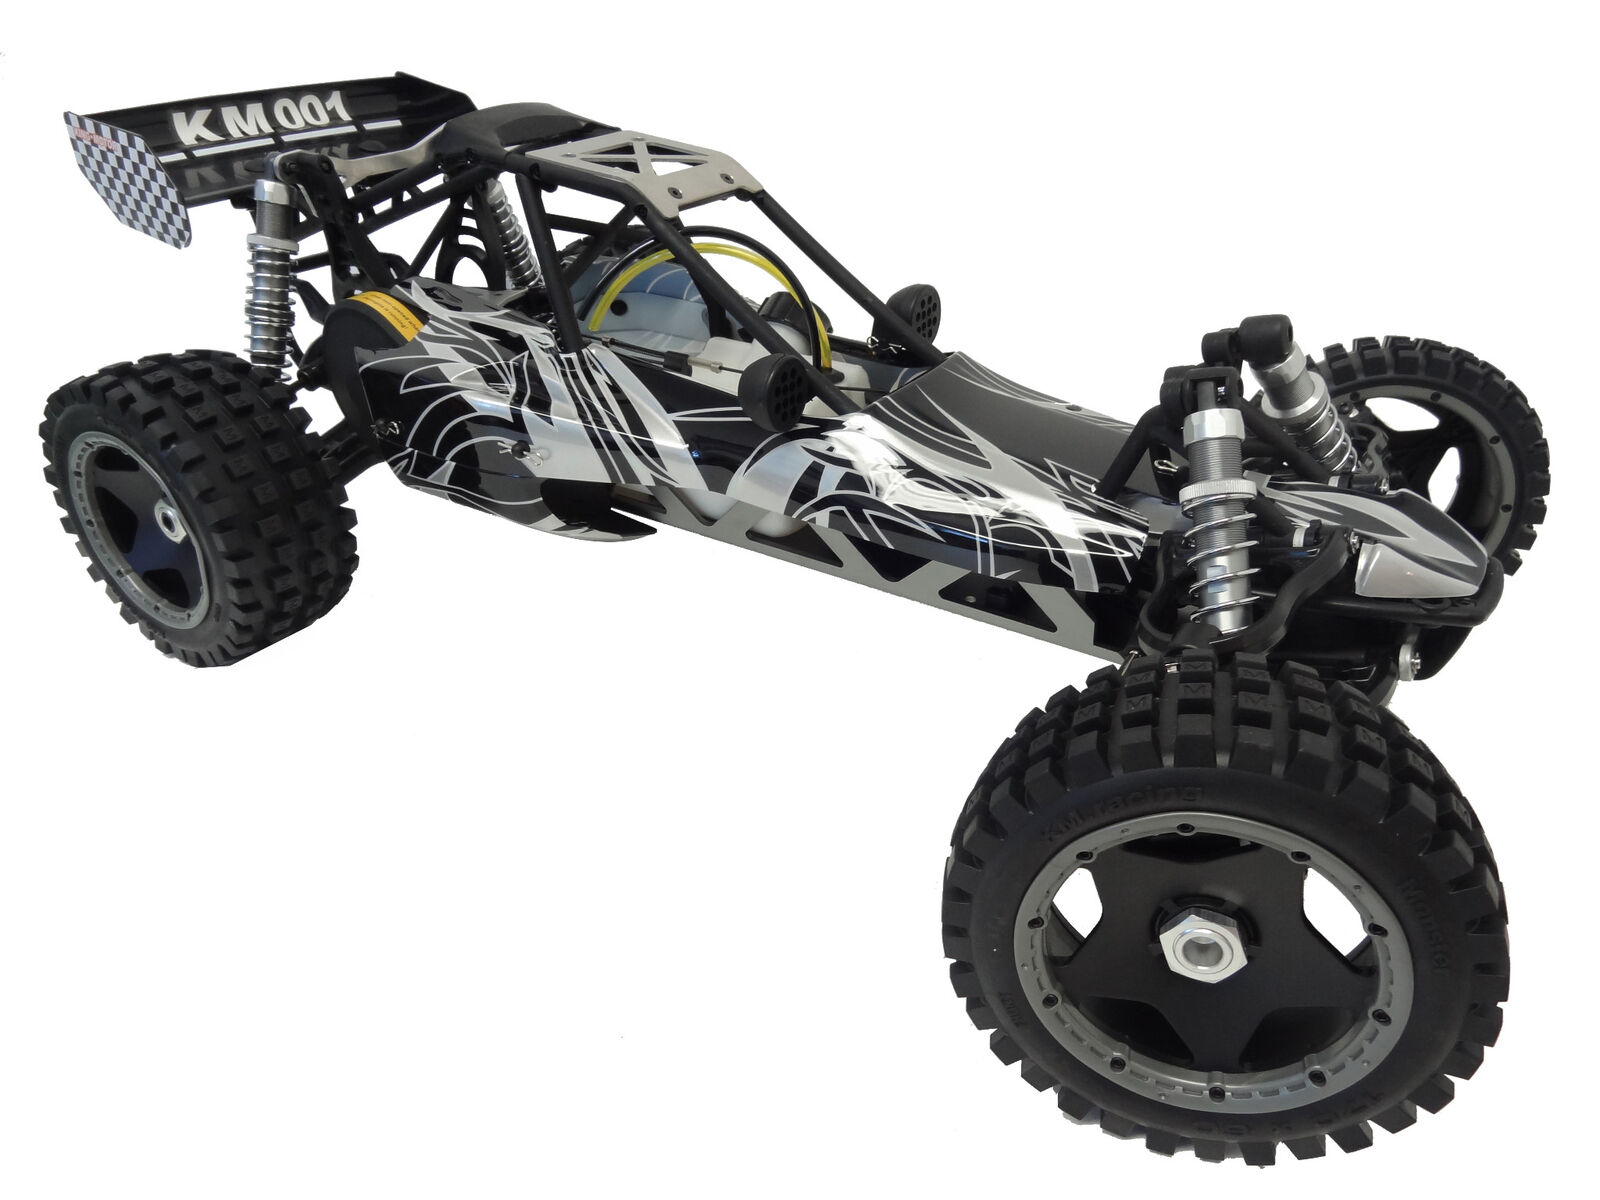 King Motor RC 1/5 Scale Roller Buggy Fits HPI Baja 5B SS Rovan, NO ENGINE/RADIO